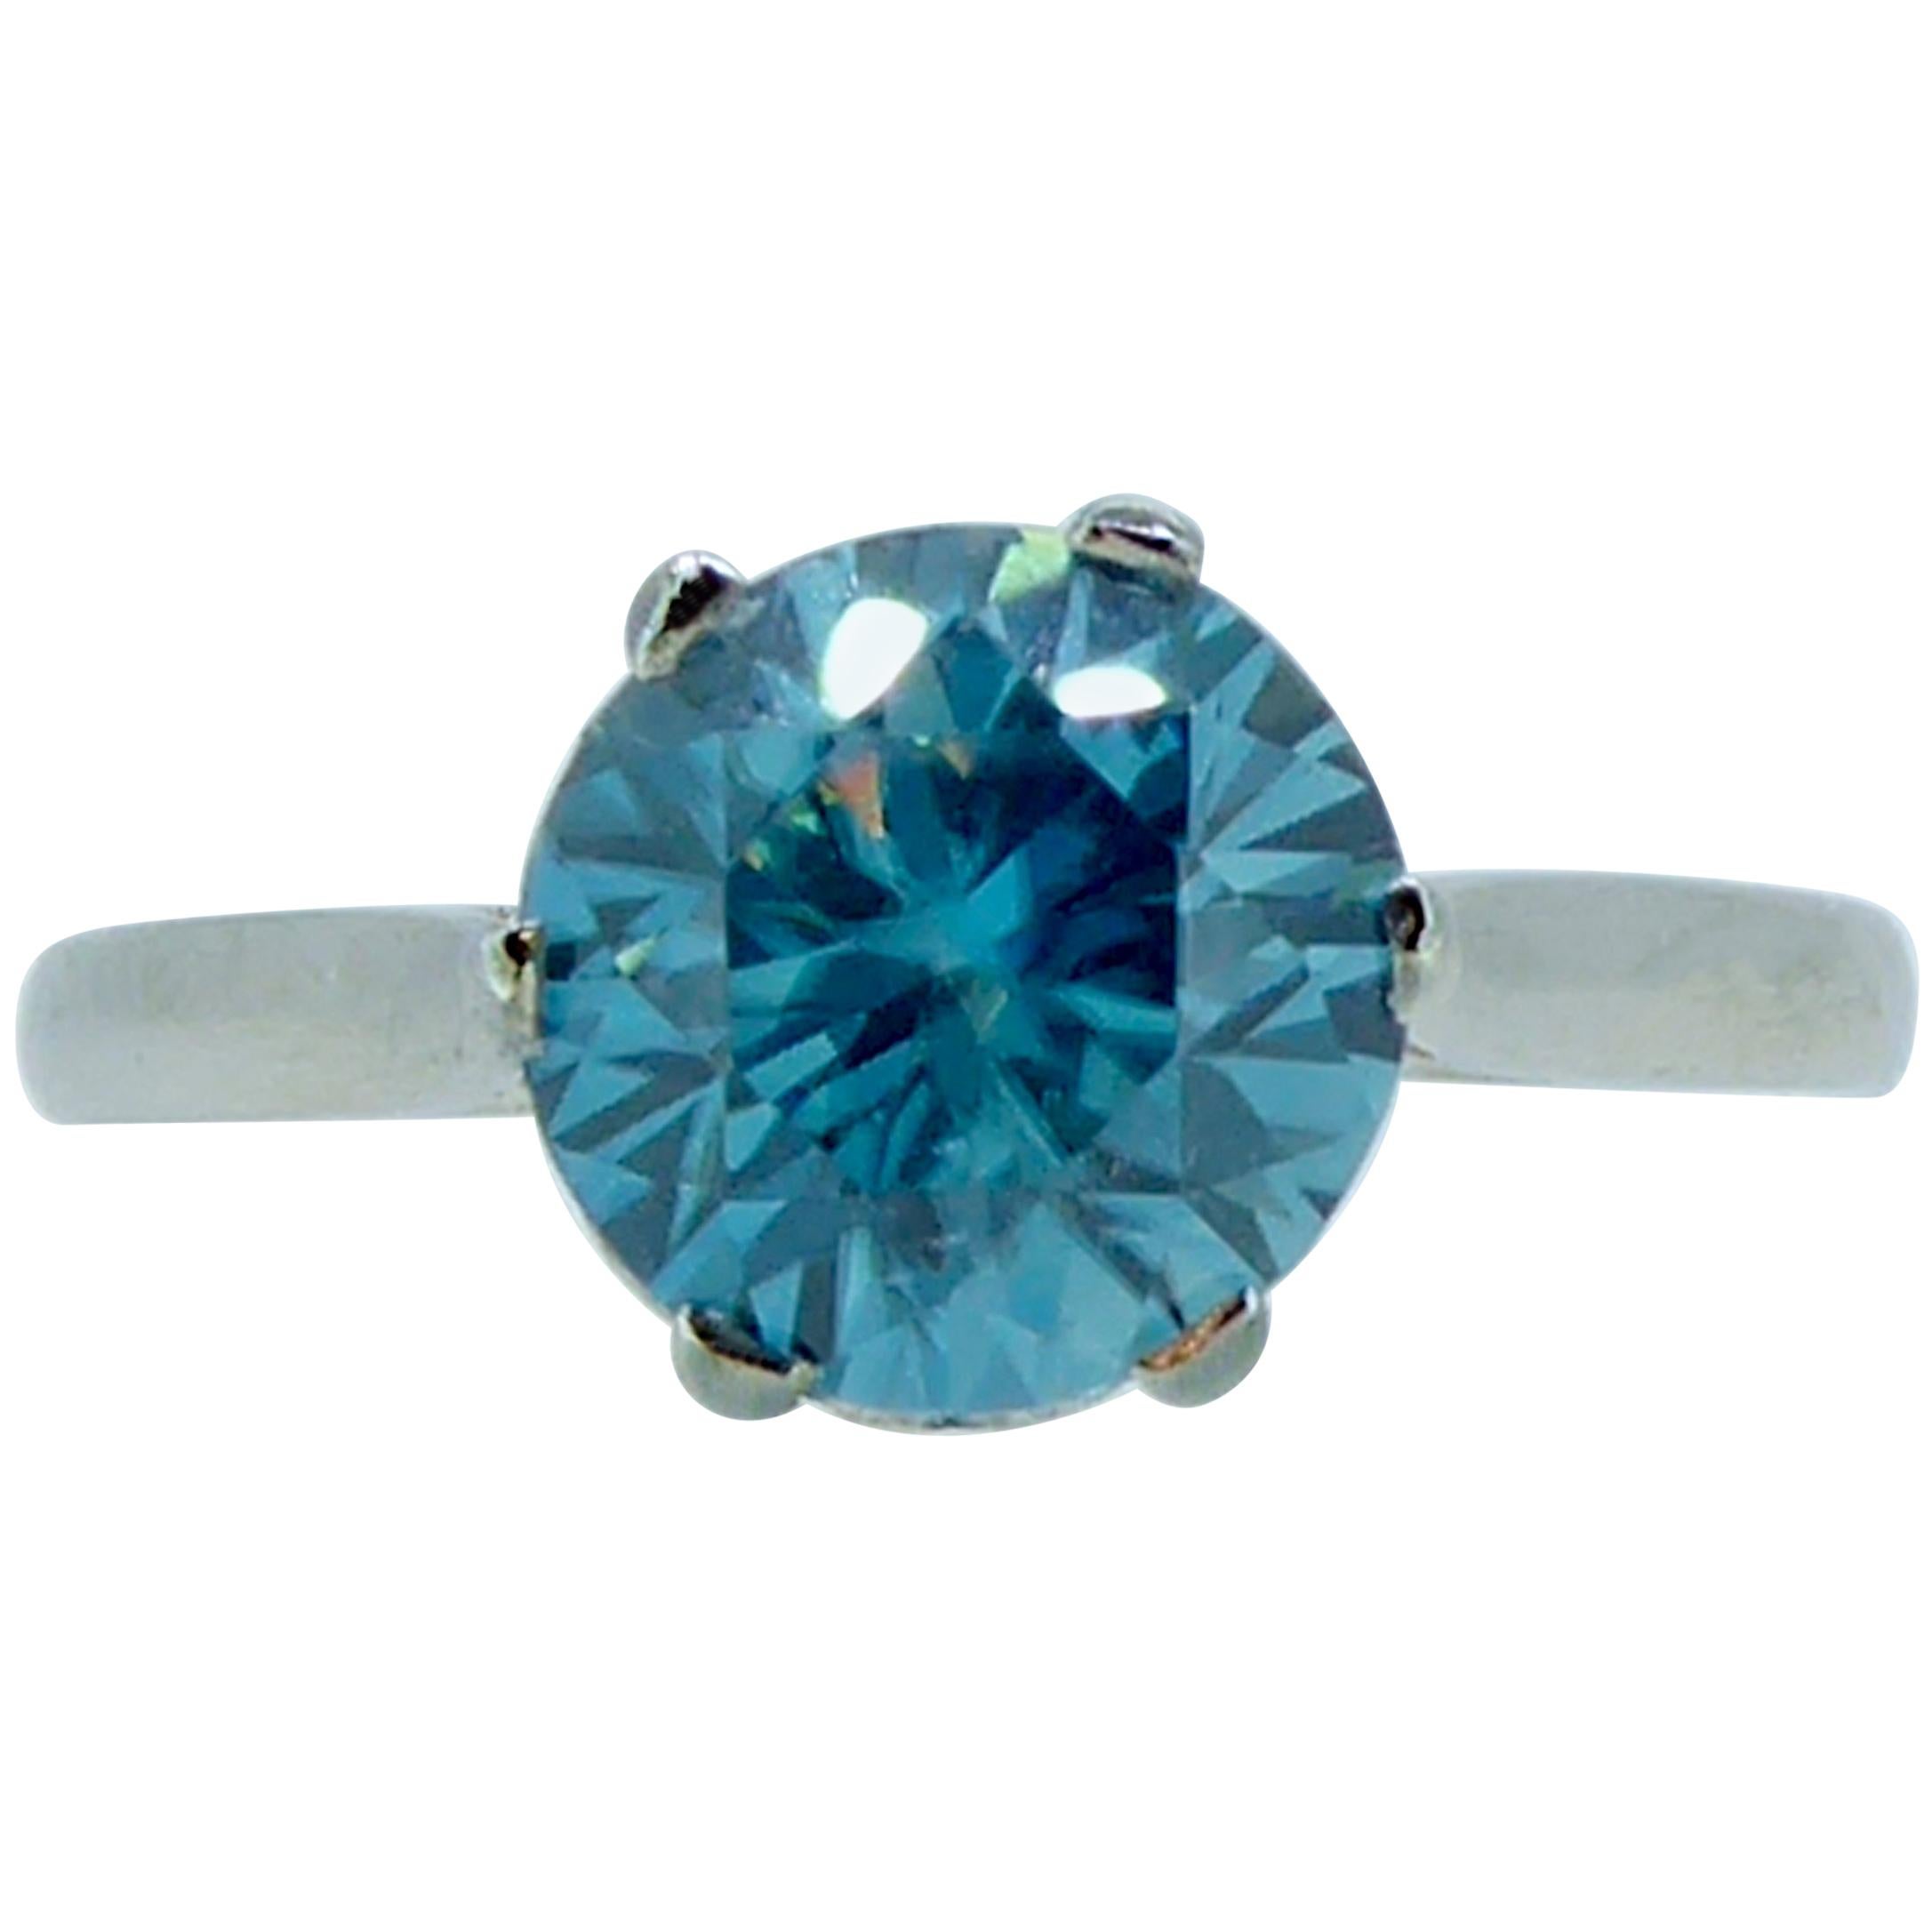 Vintage 2.50 Carat Blue Zircon Solitaire Ring, French Marks, Platinum Band